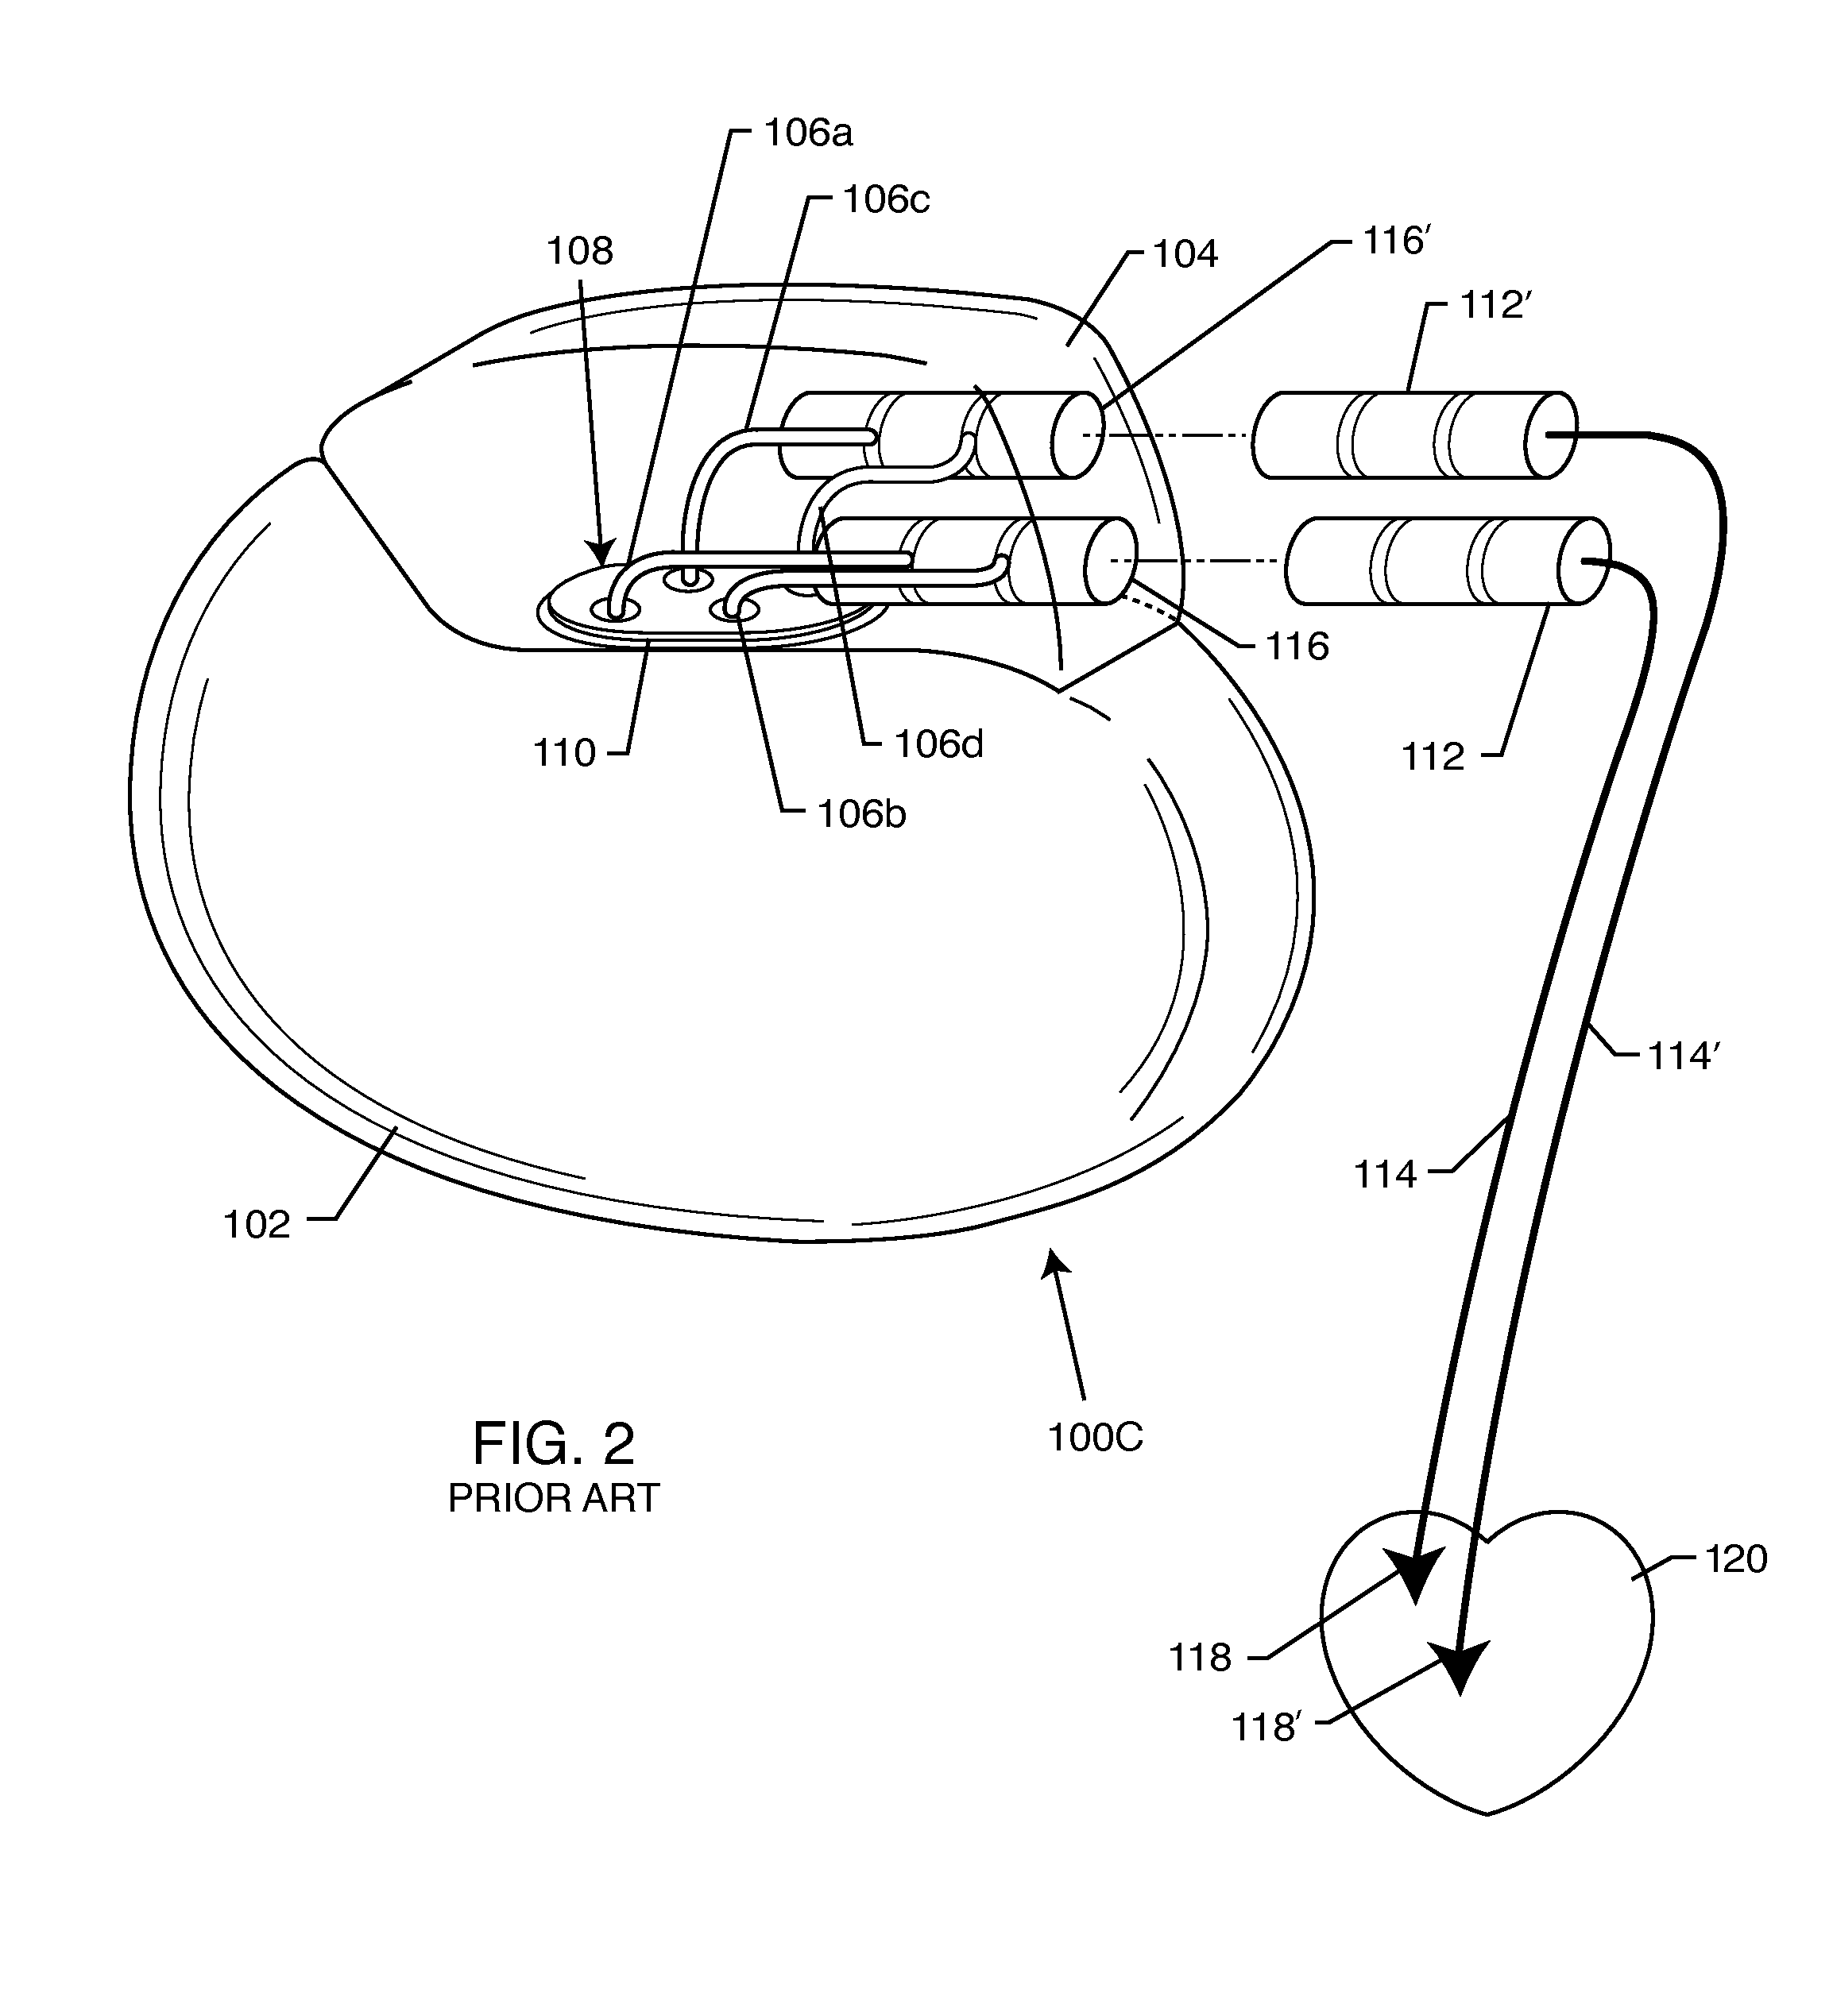 Multilayer helical wave filter for medical therapeutic or diagnostic applications